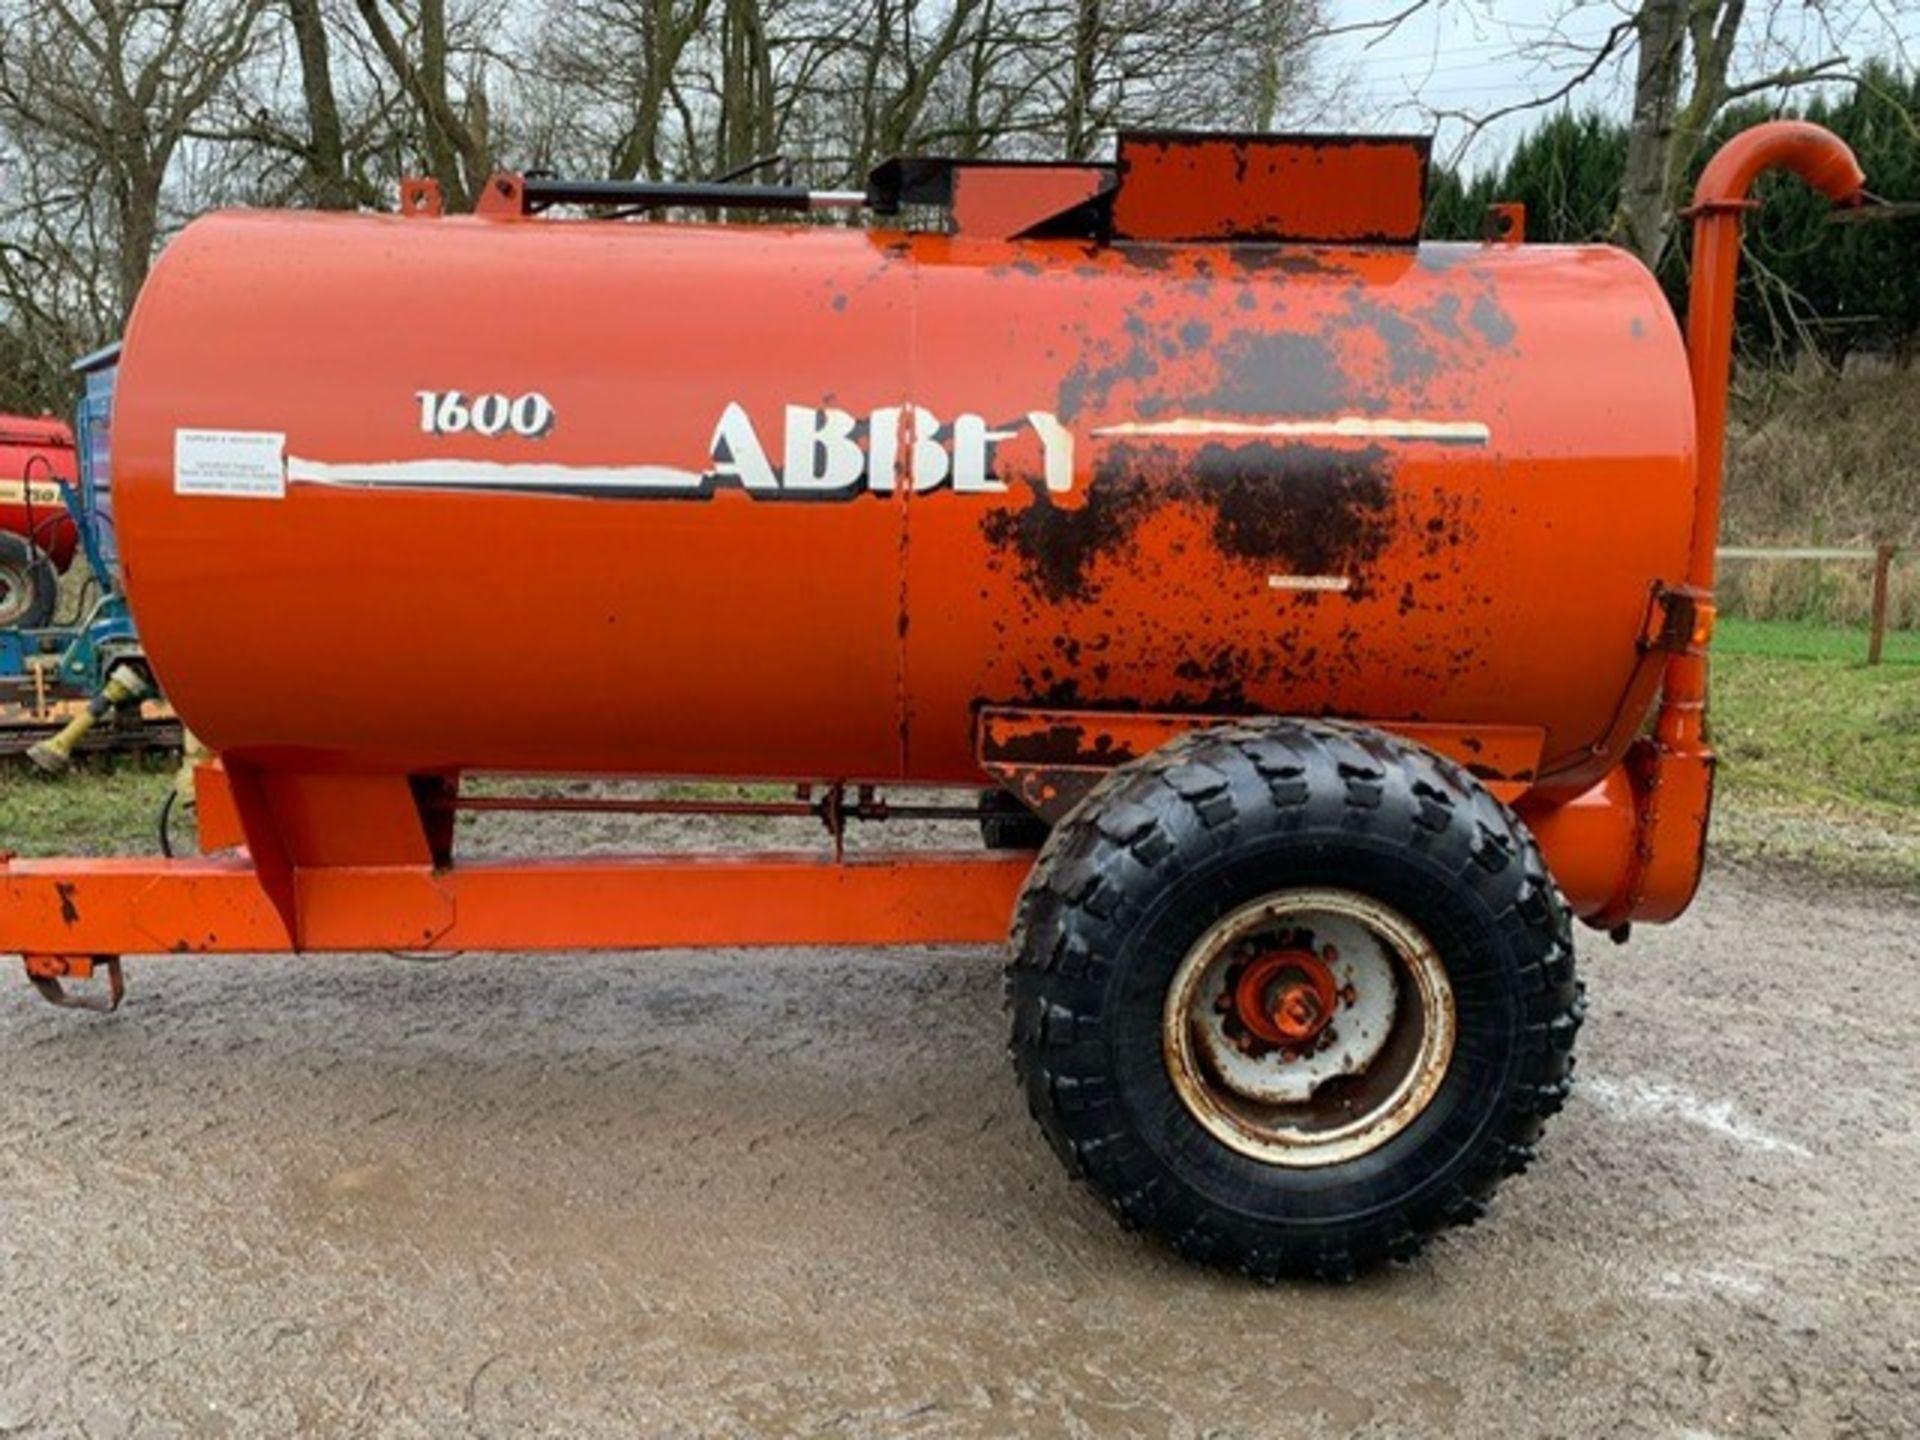 ABBEY 1600 GALLON TOP FILL TANKER - Image 6 of 8